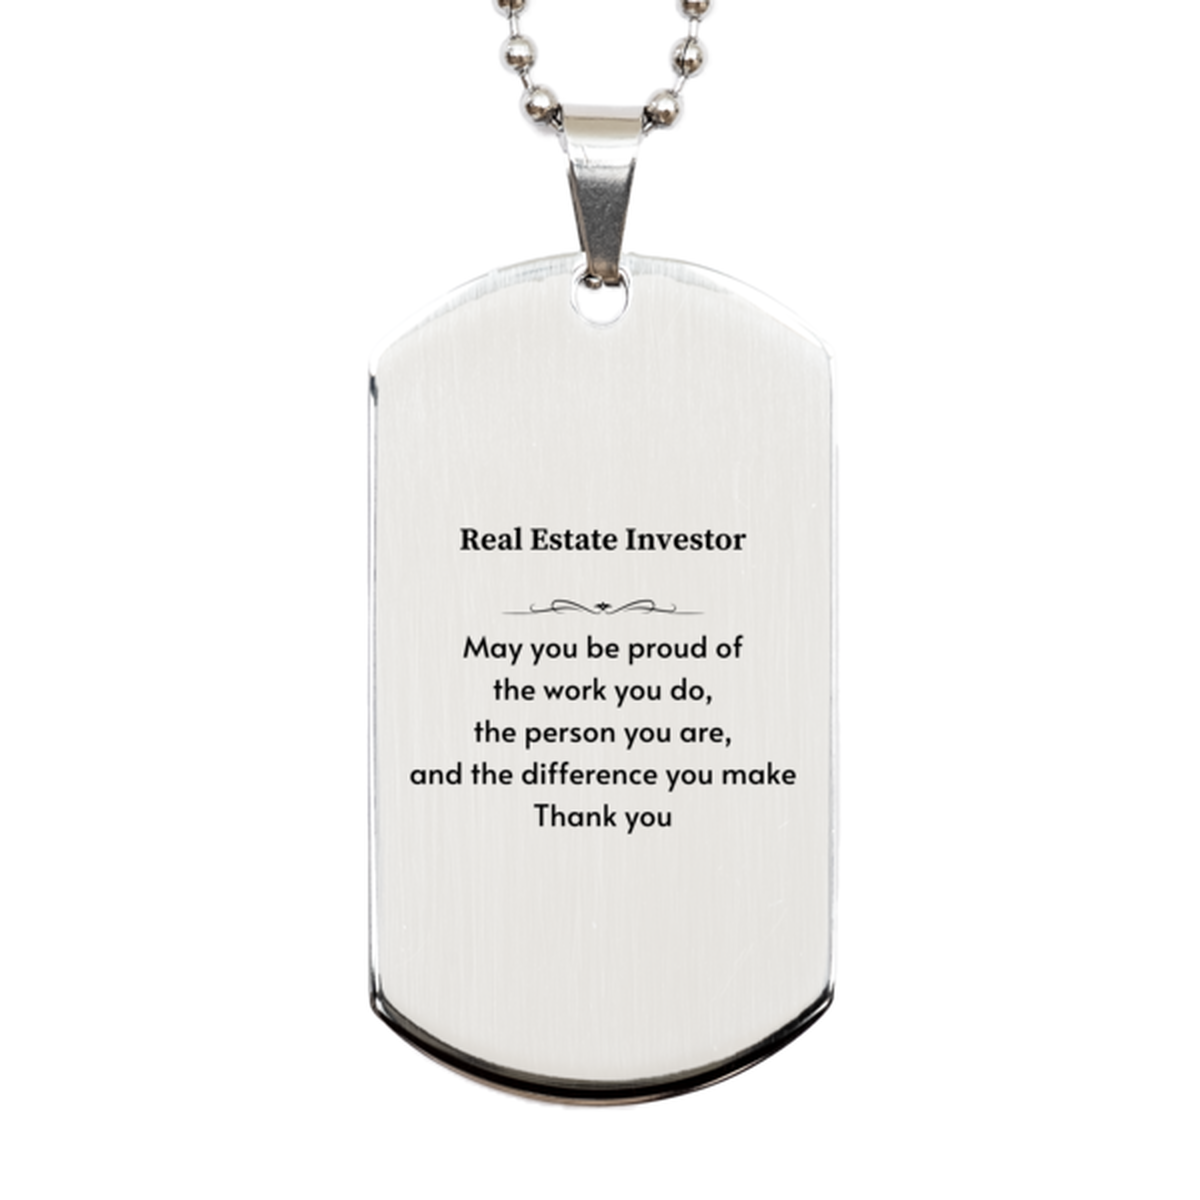 Heartwarming Silver Dog Tag Retirement Coworkers Gifts for Real Estate Investor, Real Estate Investor May You be proud of the work you do, the person you are Gifts for Boss Men Women Friends